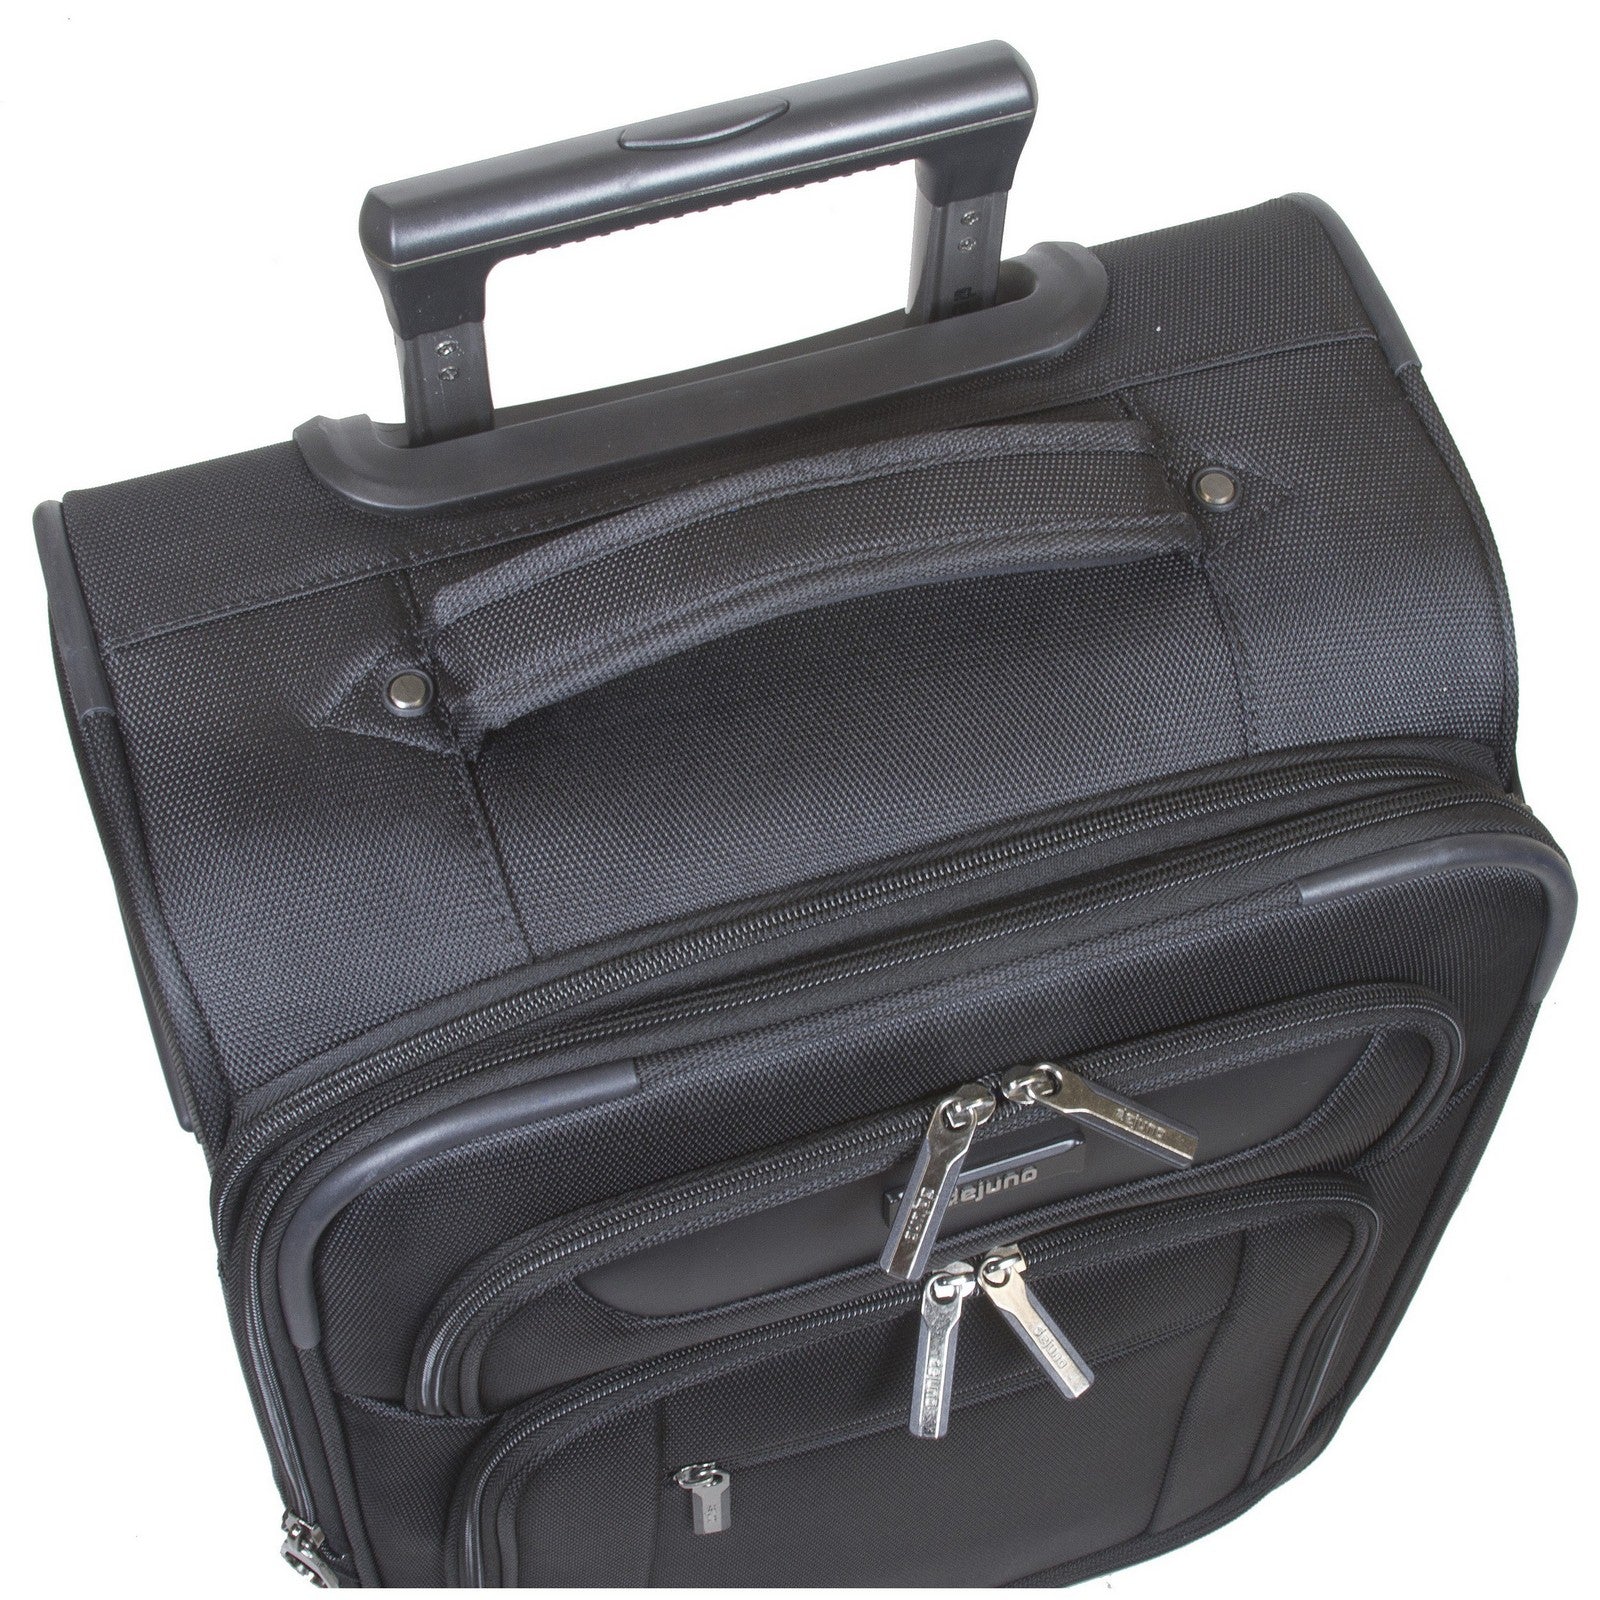 Dejuno Executive 3-Piece Spinner Luggage Set With USB Port